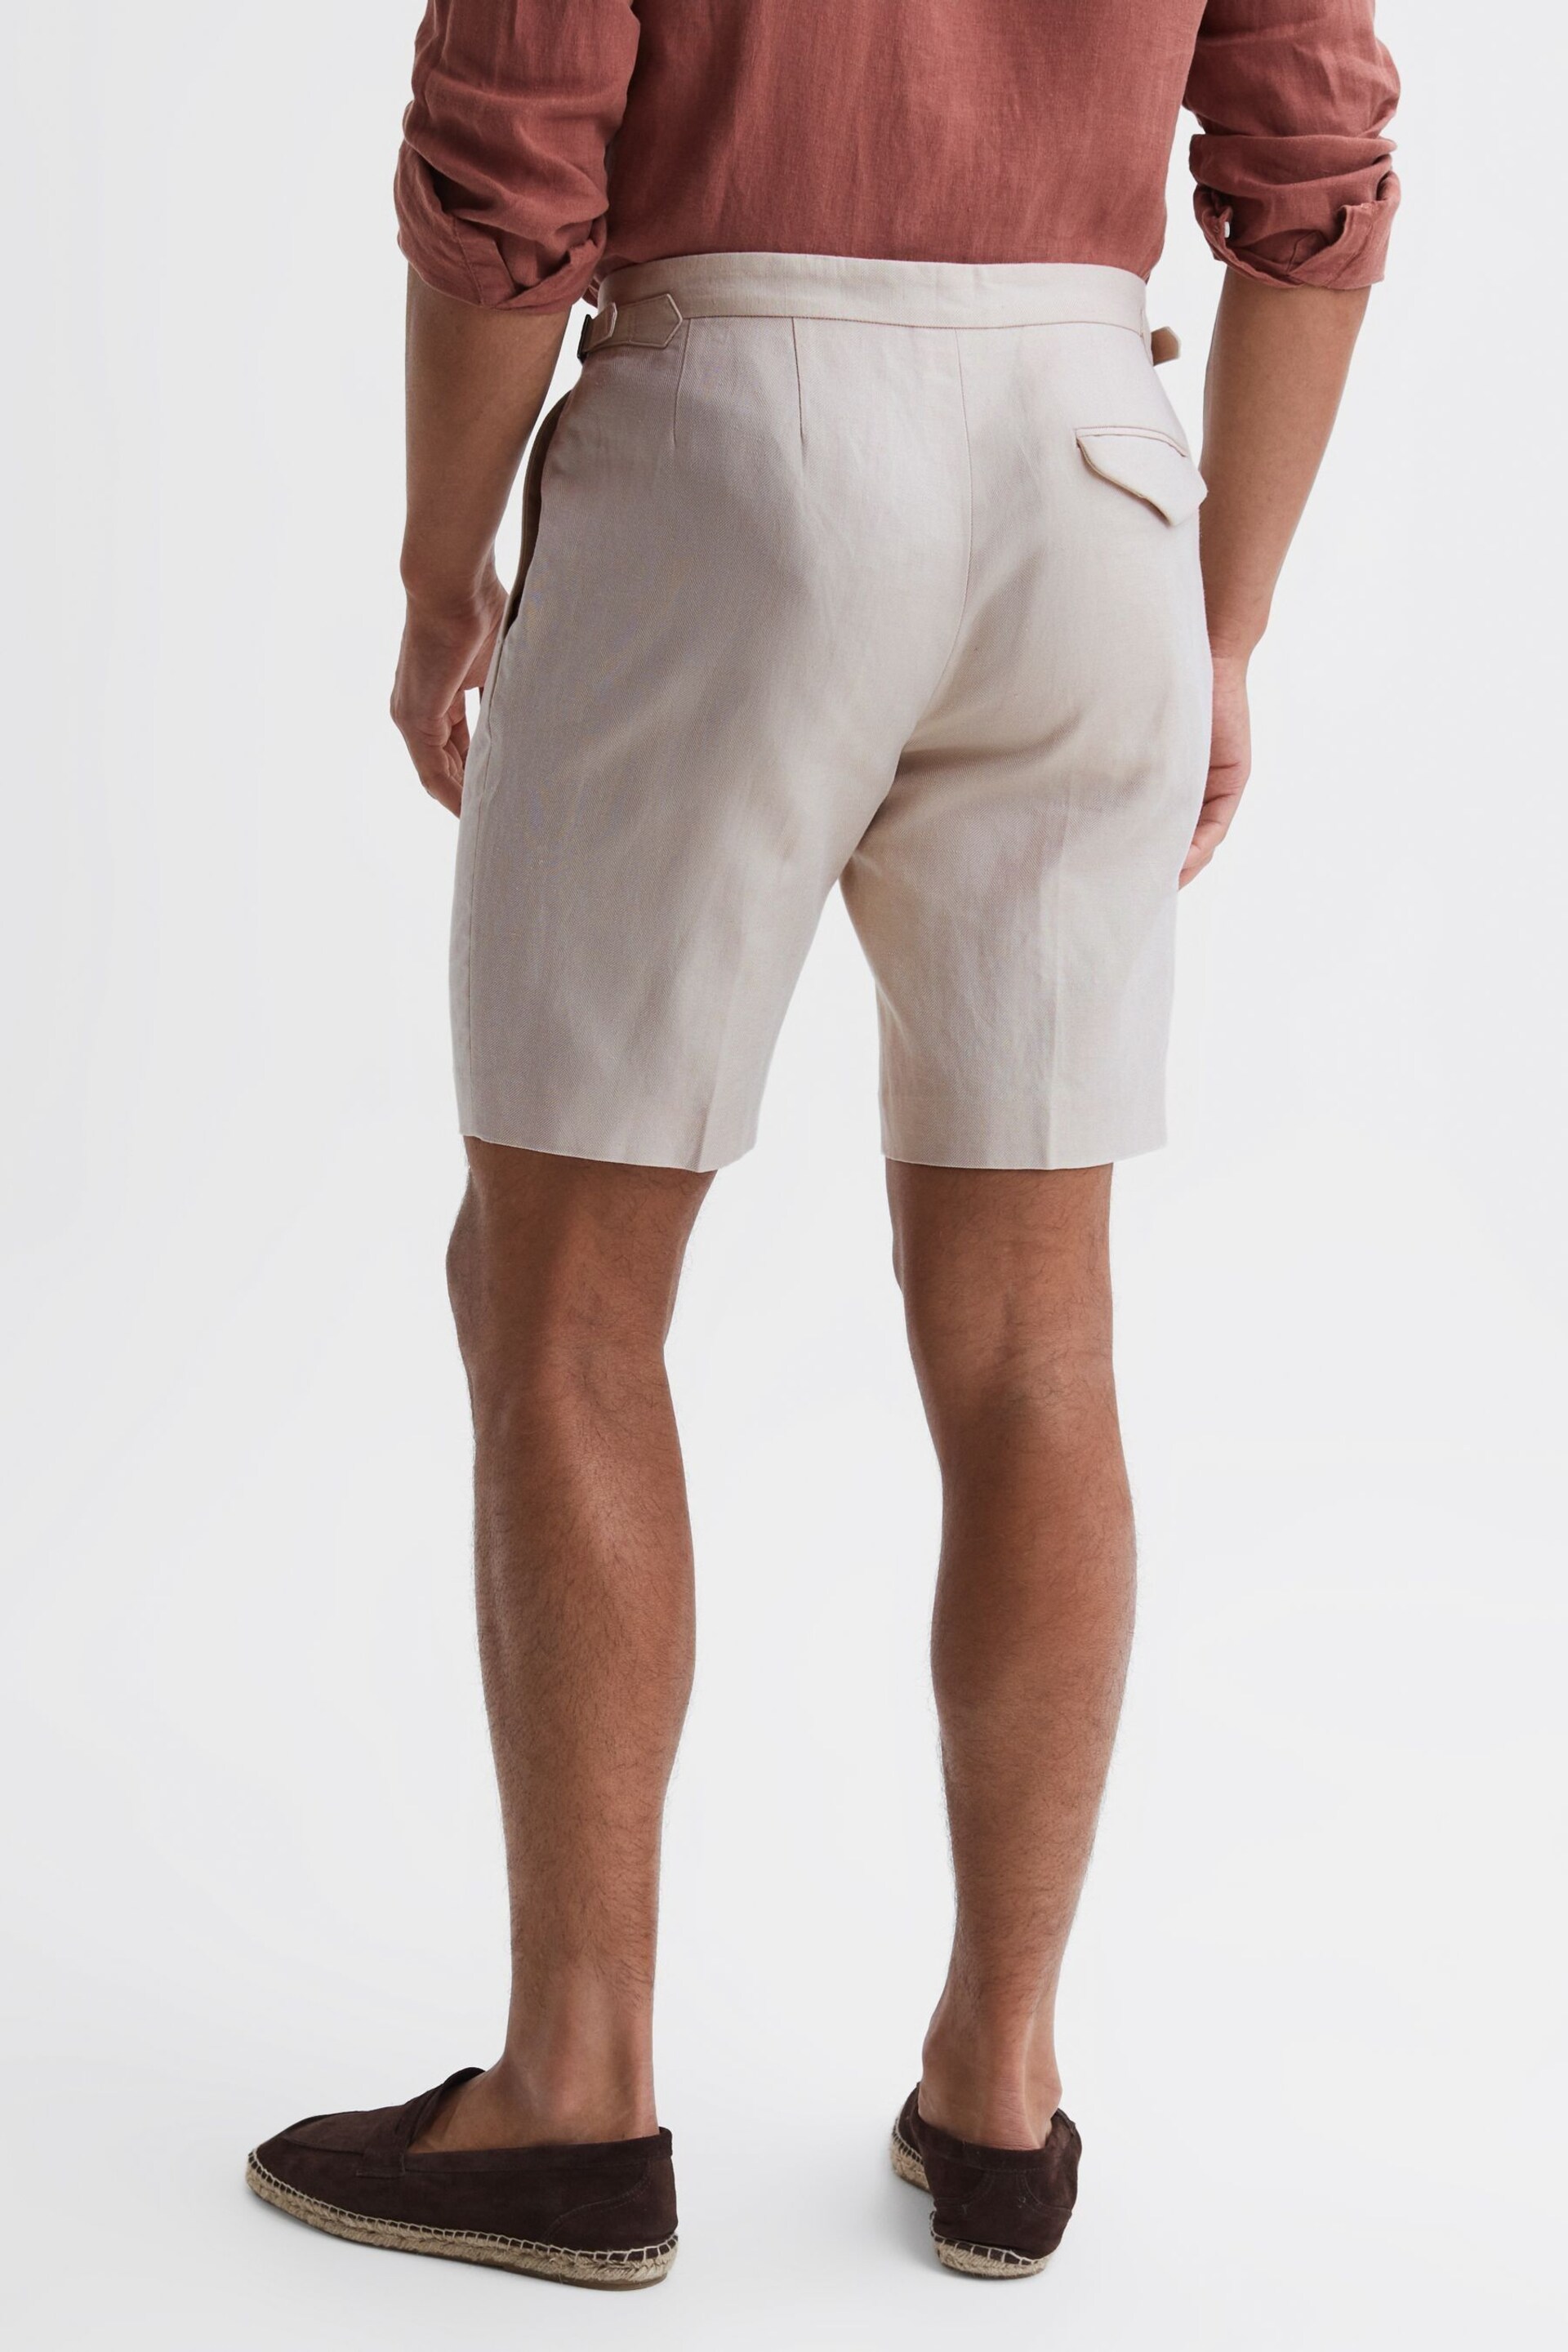 Reiss Stone Path Cotton-Linen Blend Chino Shorts - Image 4 of 6